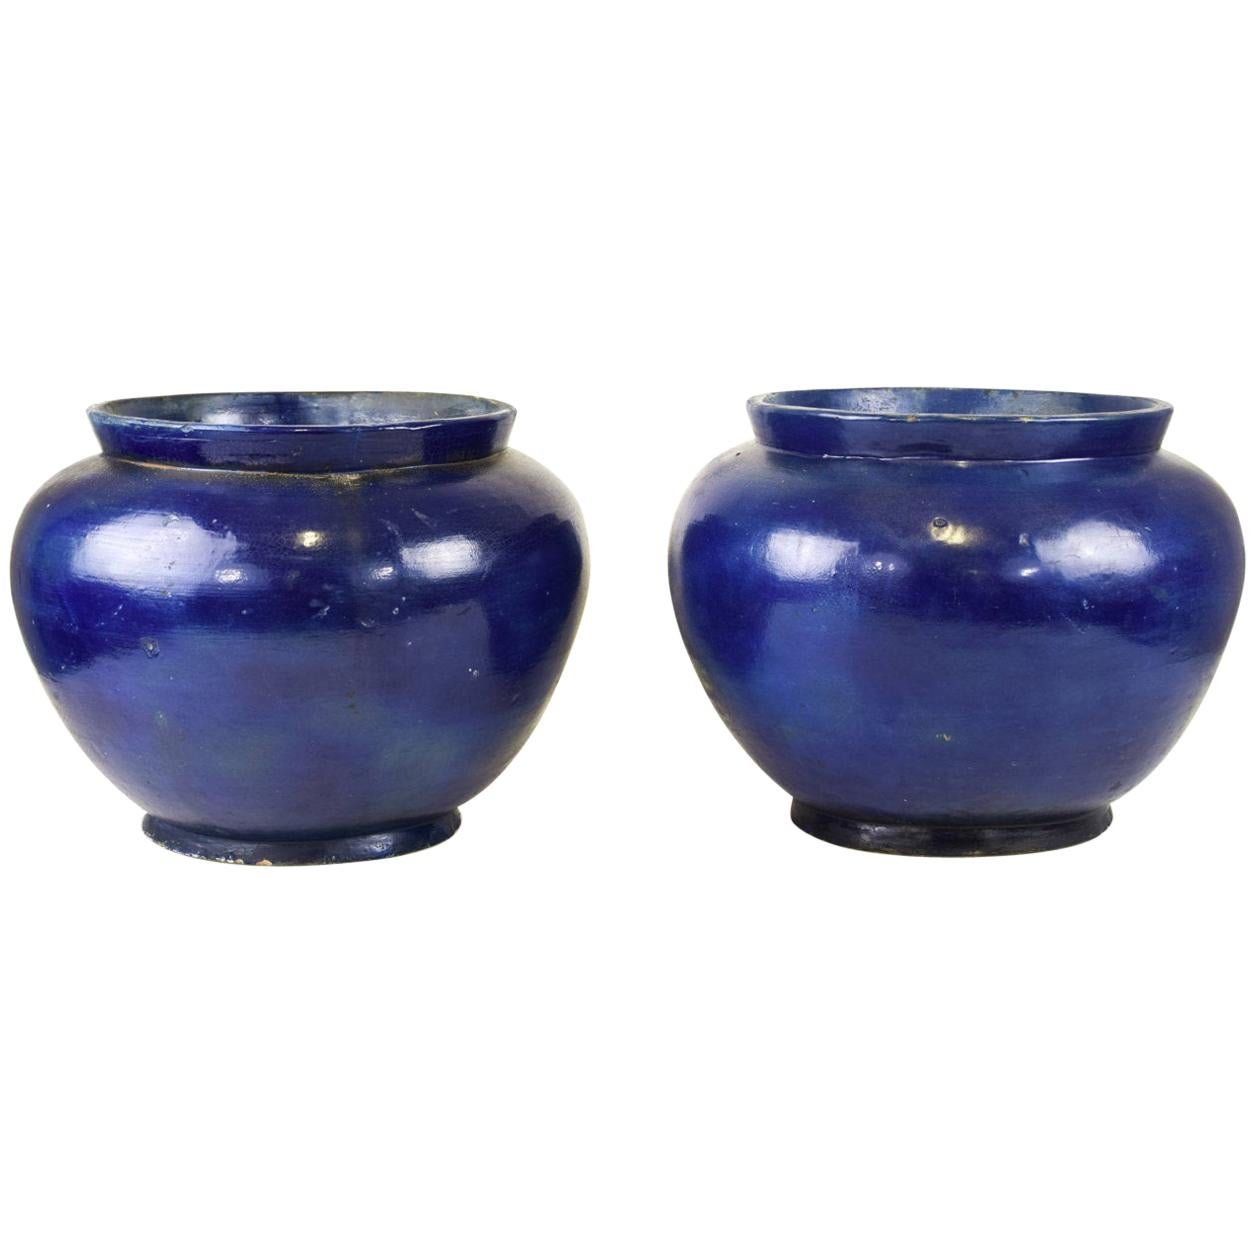 Pair of Ancient Blue Terracotta Vases, by Oriental Manufacture, 19th Century